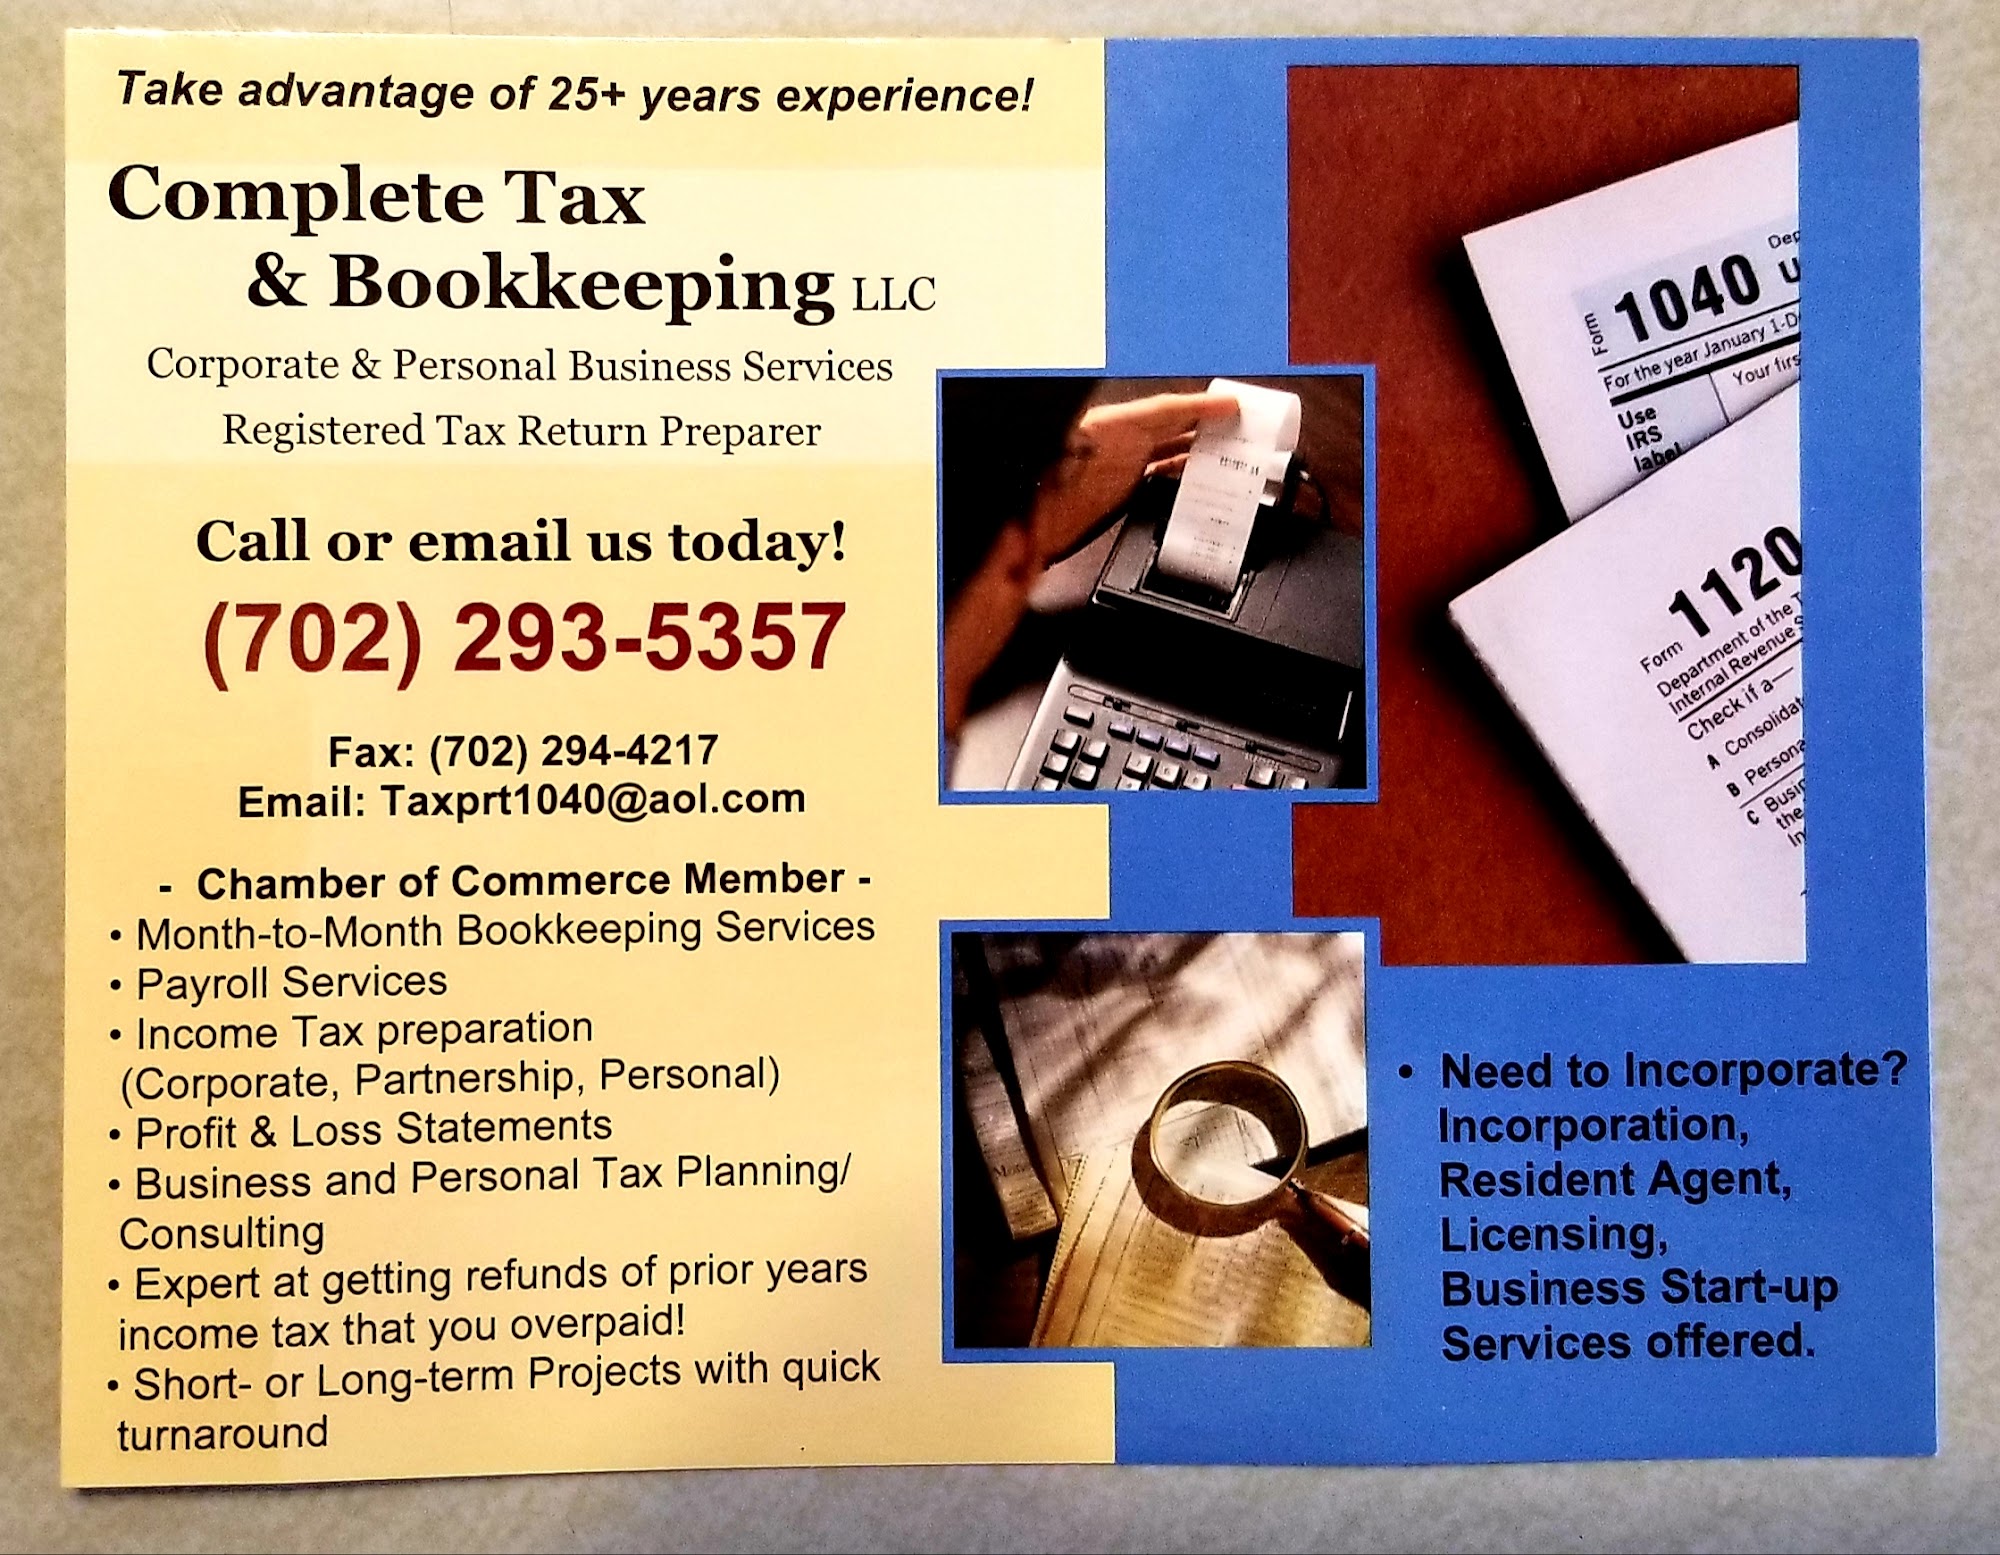 Complete Tax & Bookkeeping LLC